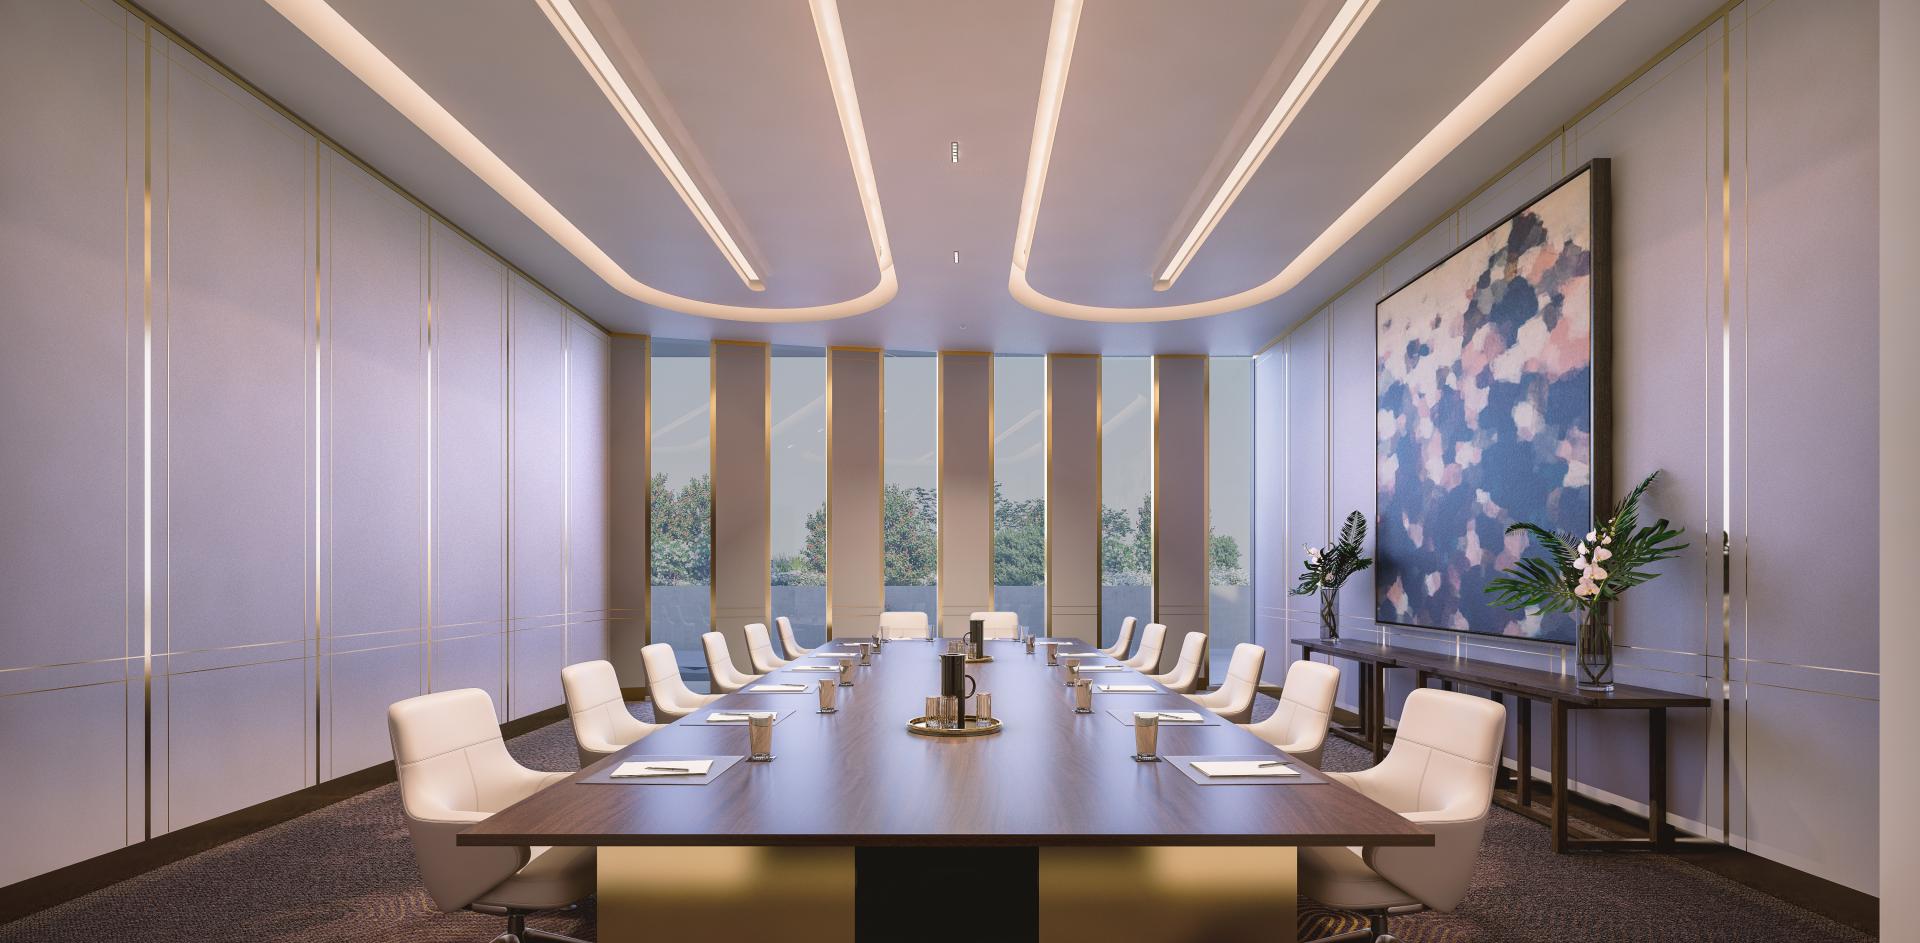 Hotel Chadstone Melbourne meeting room